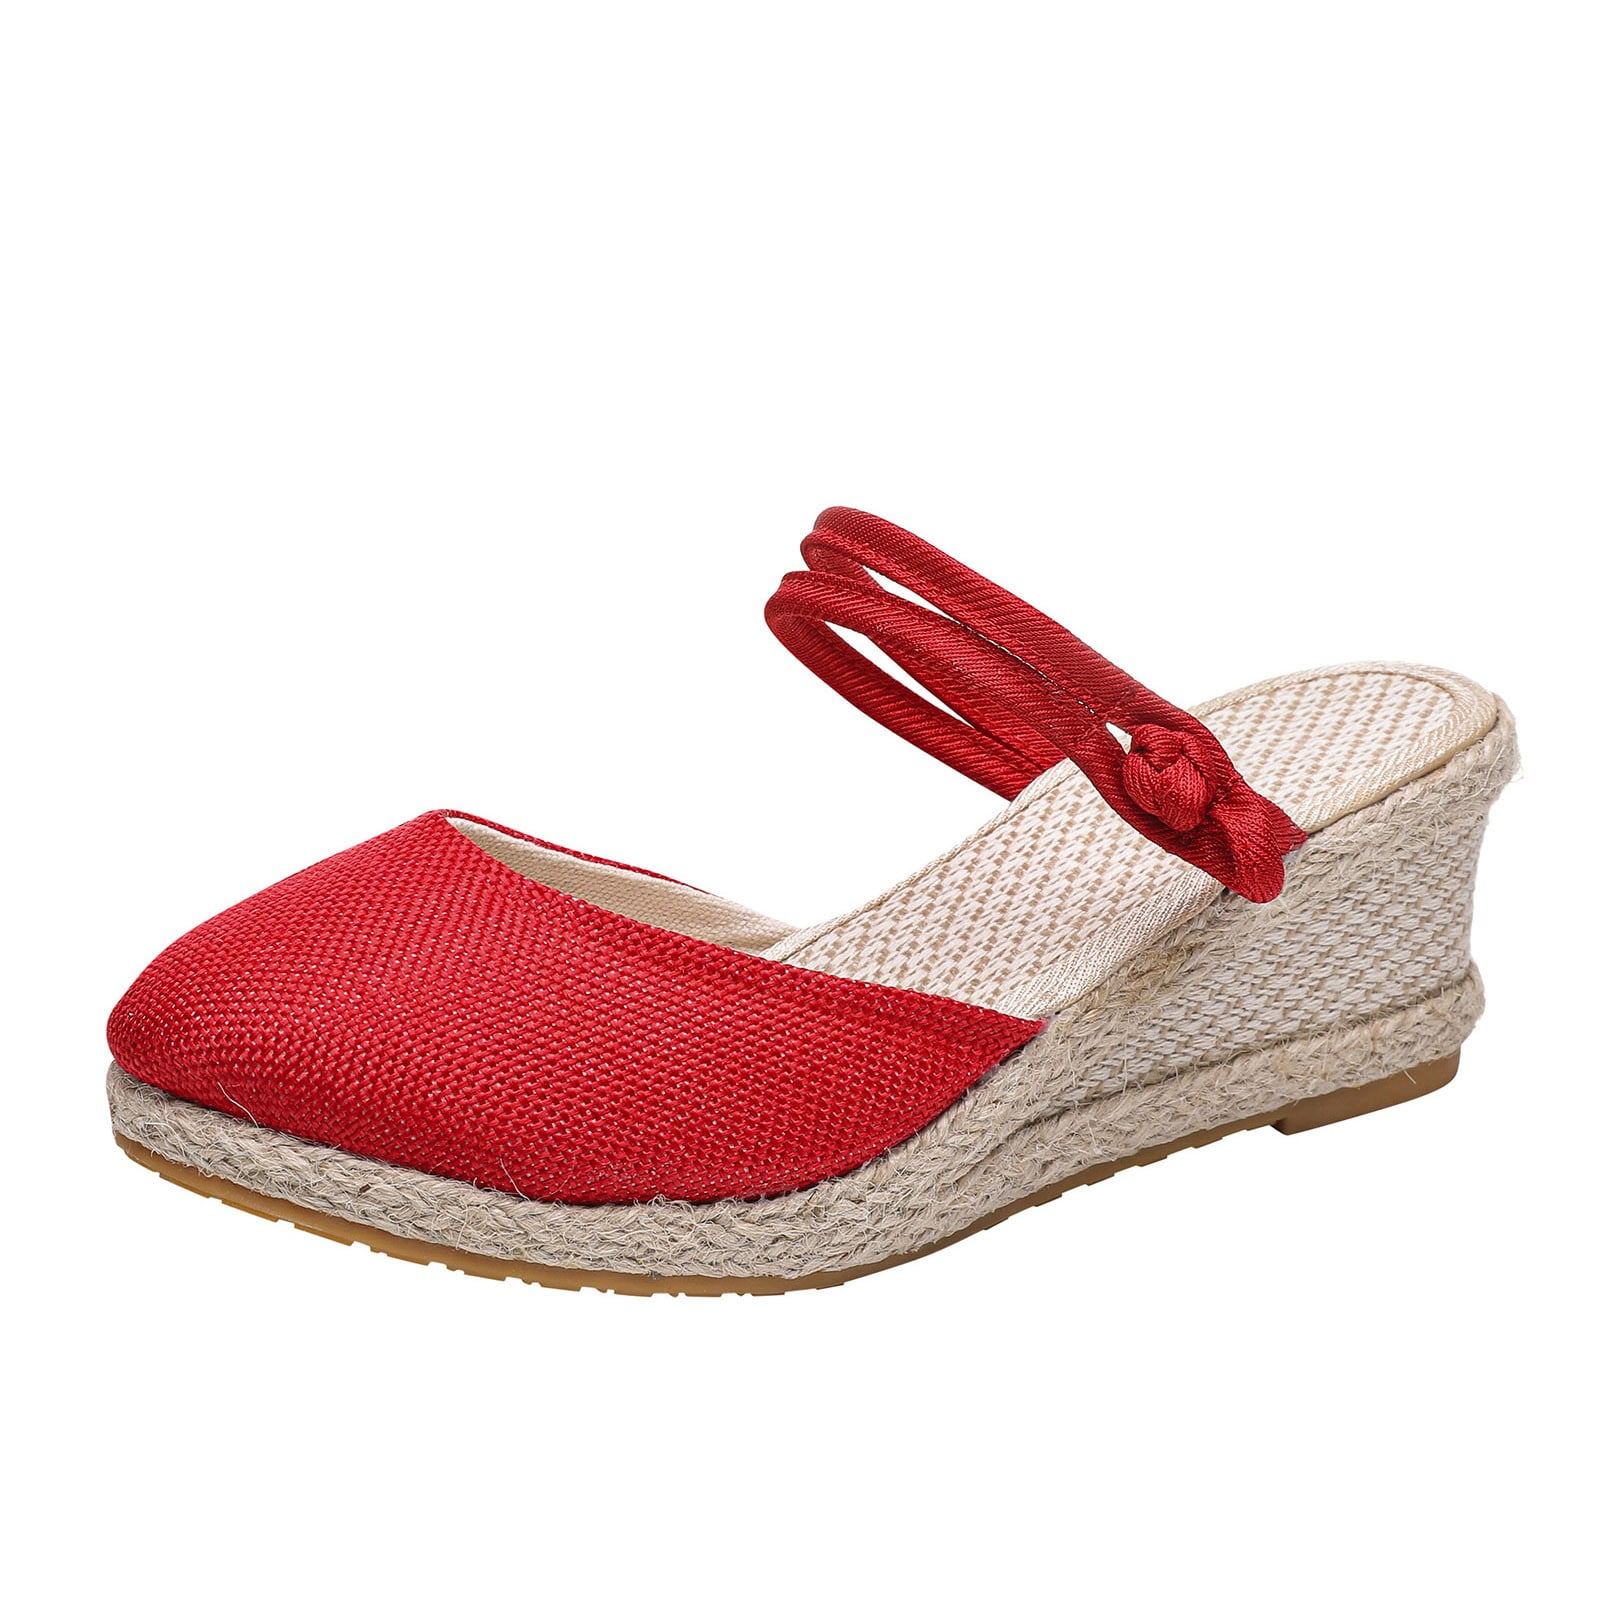 Espadrille Wedge Sandals For Women, Buckle Ankle Strap Casual Summer ...